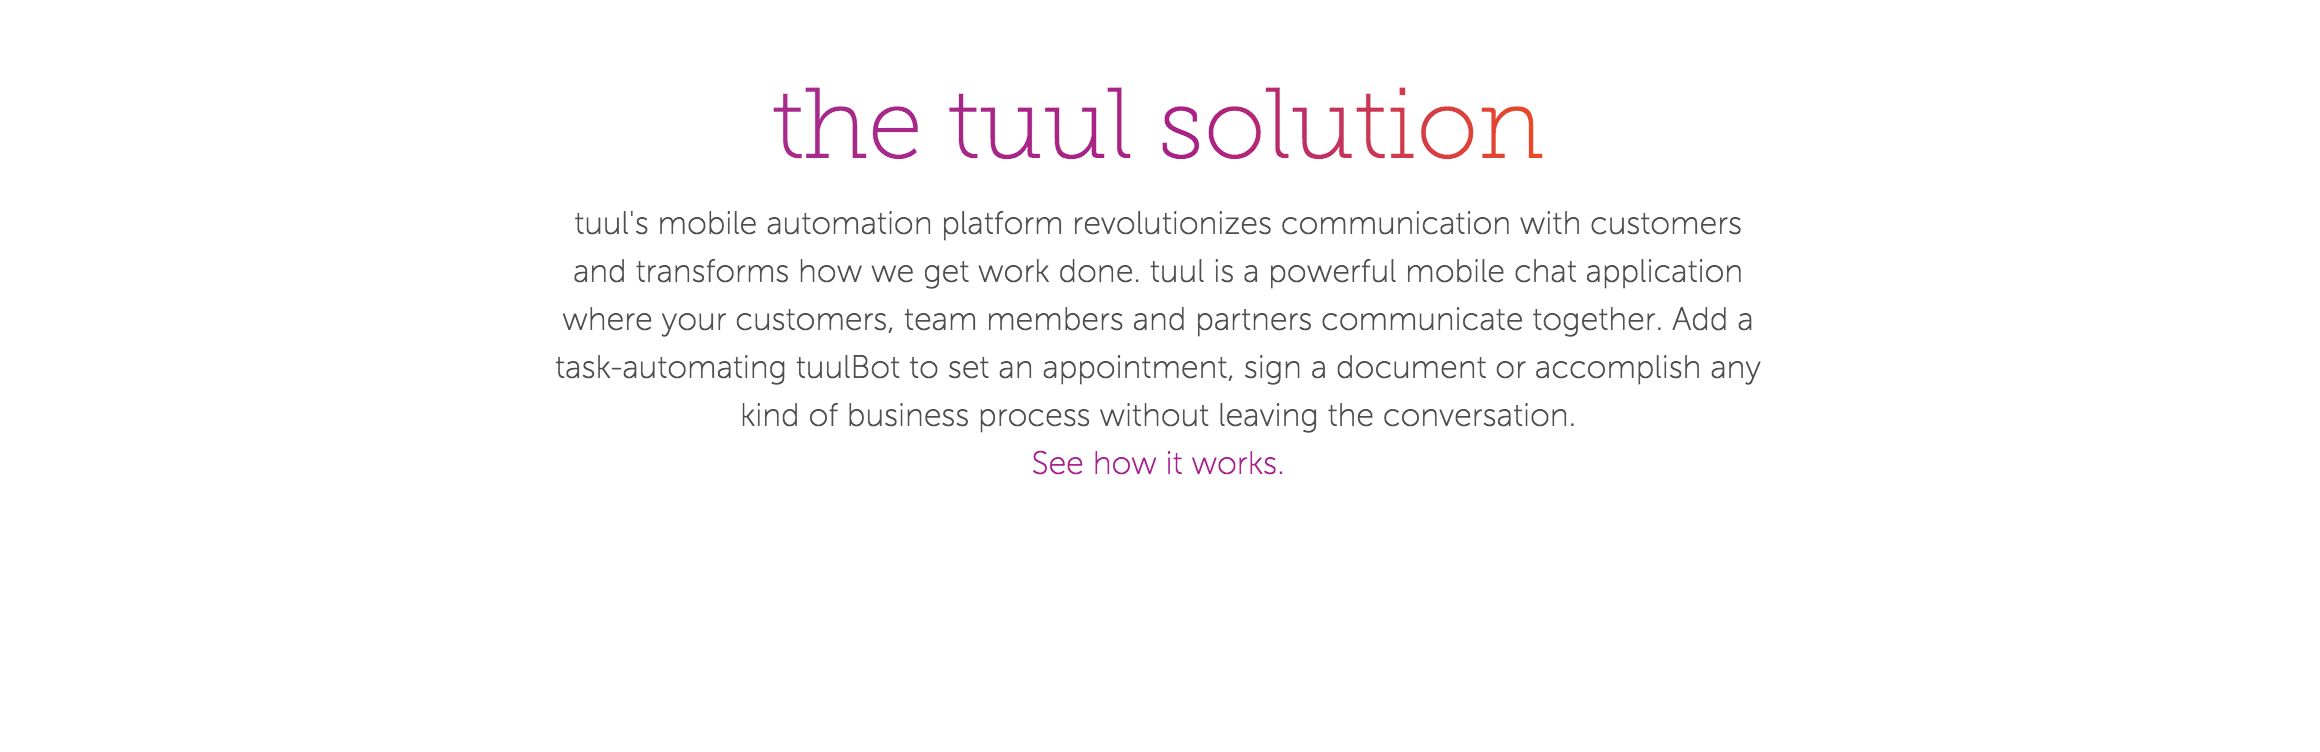 tuul-web-03.png